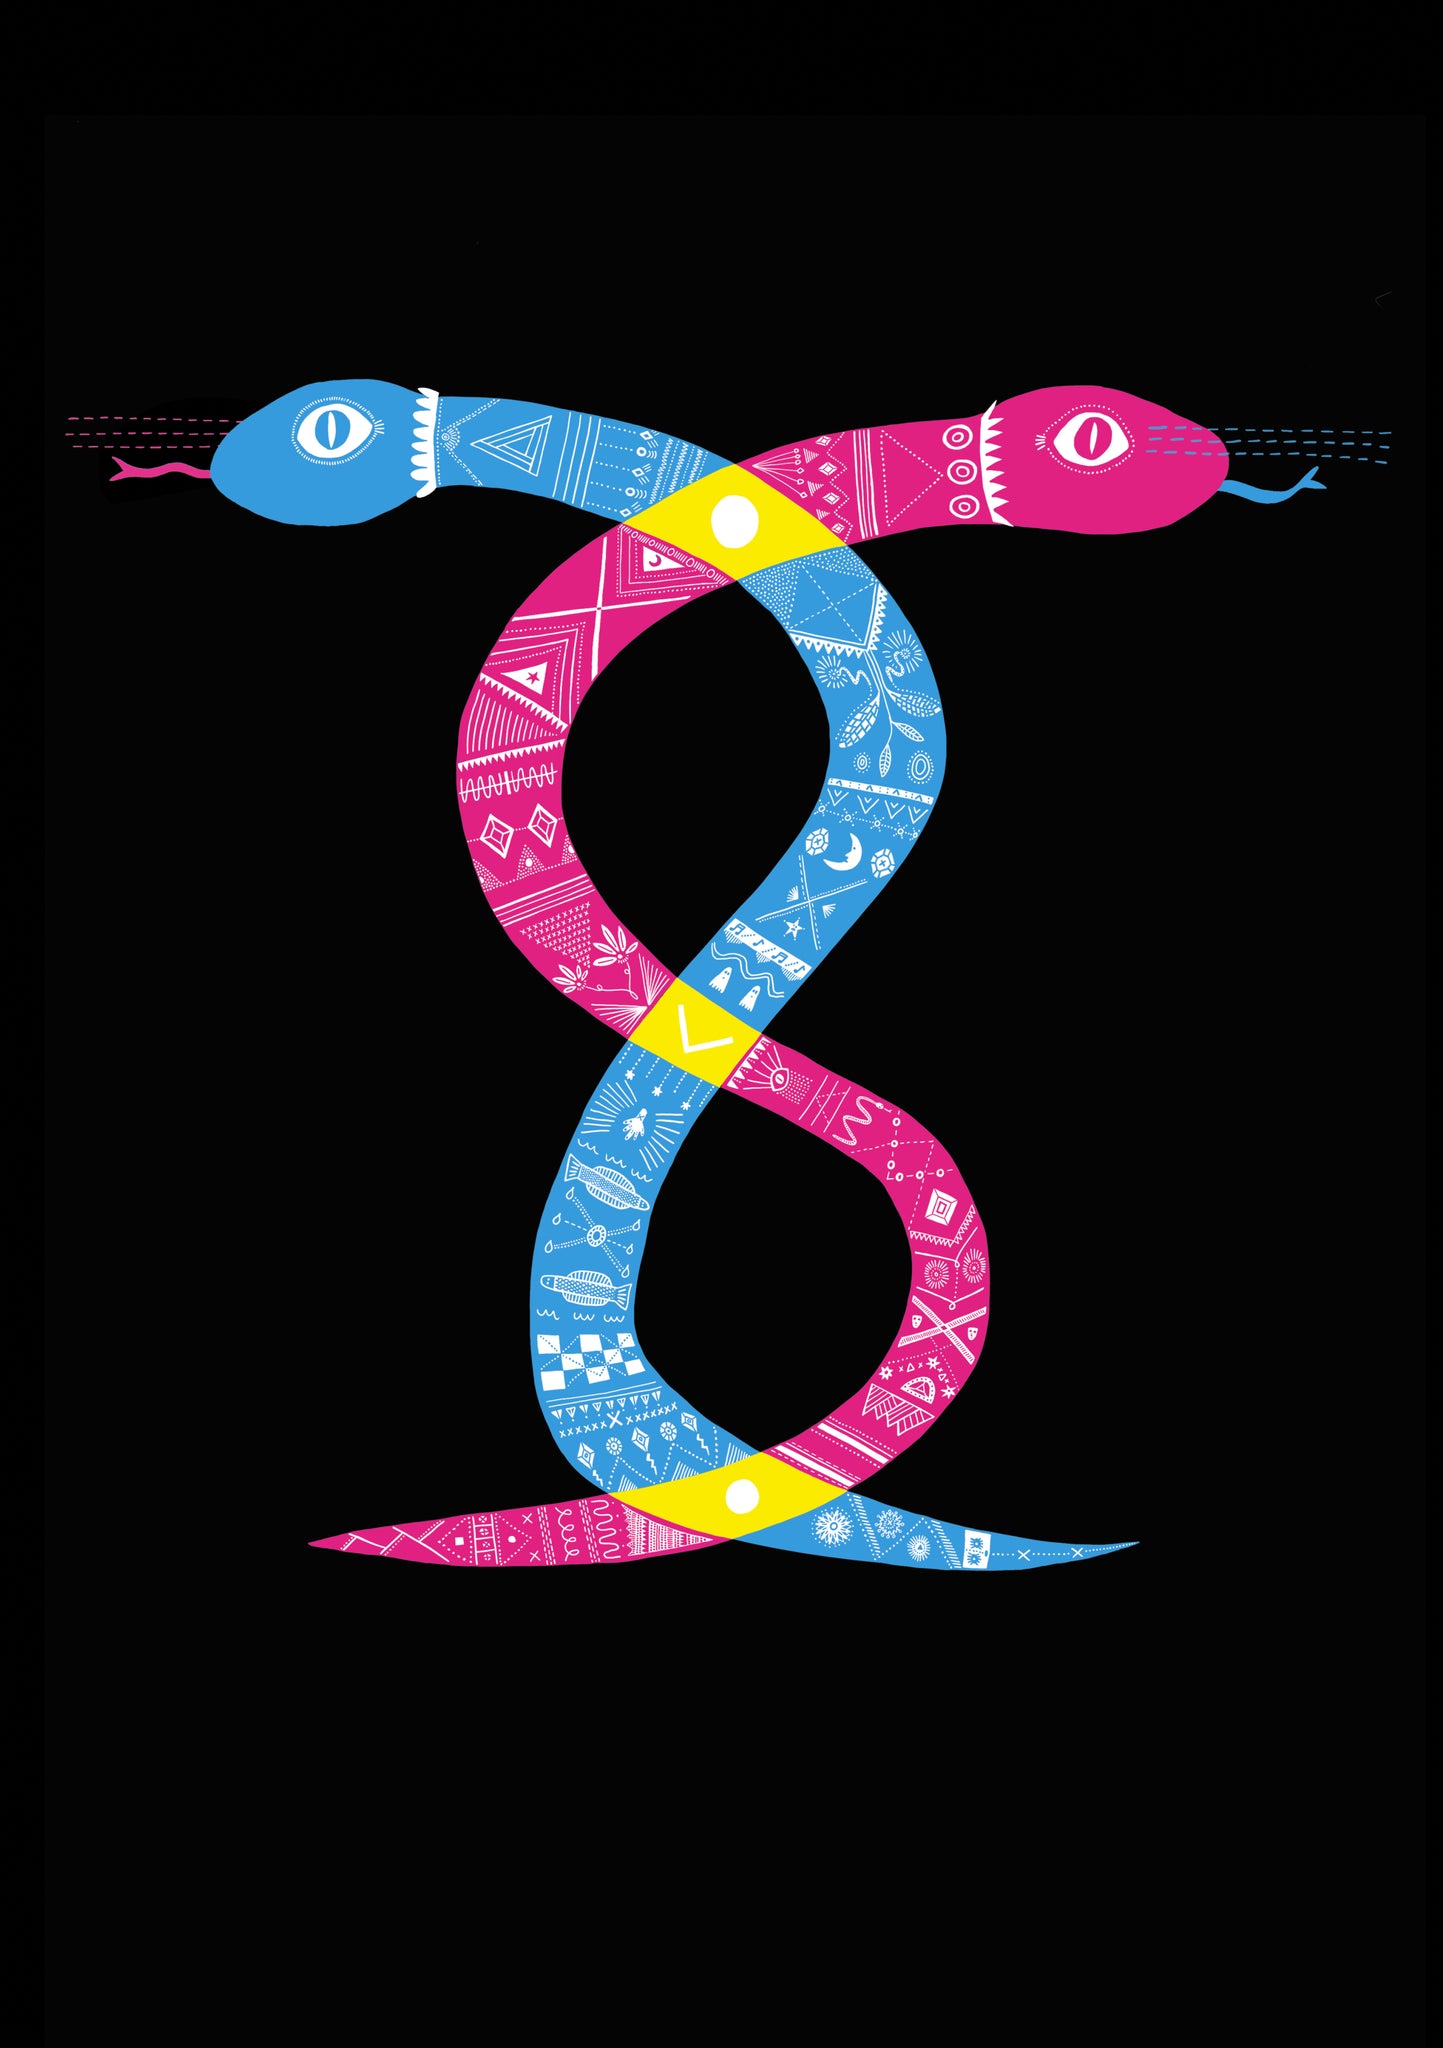 The Infinity Snakes of Time Giant Greeting Card (Black)